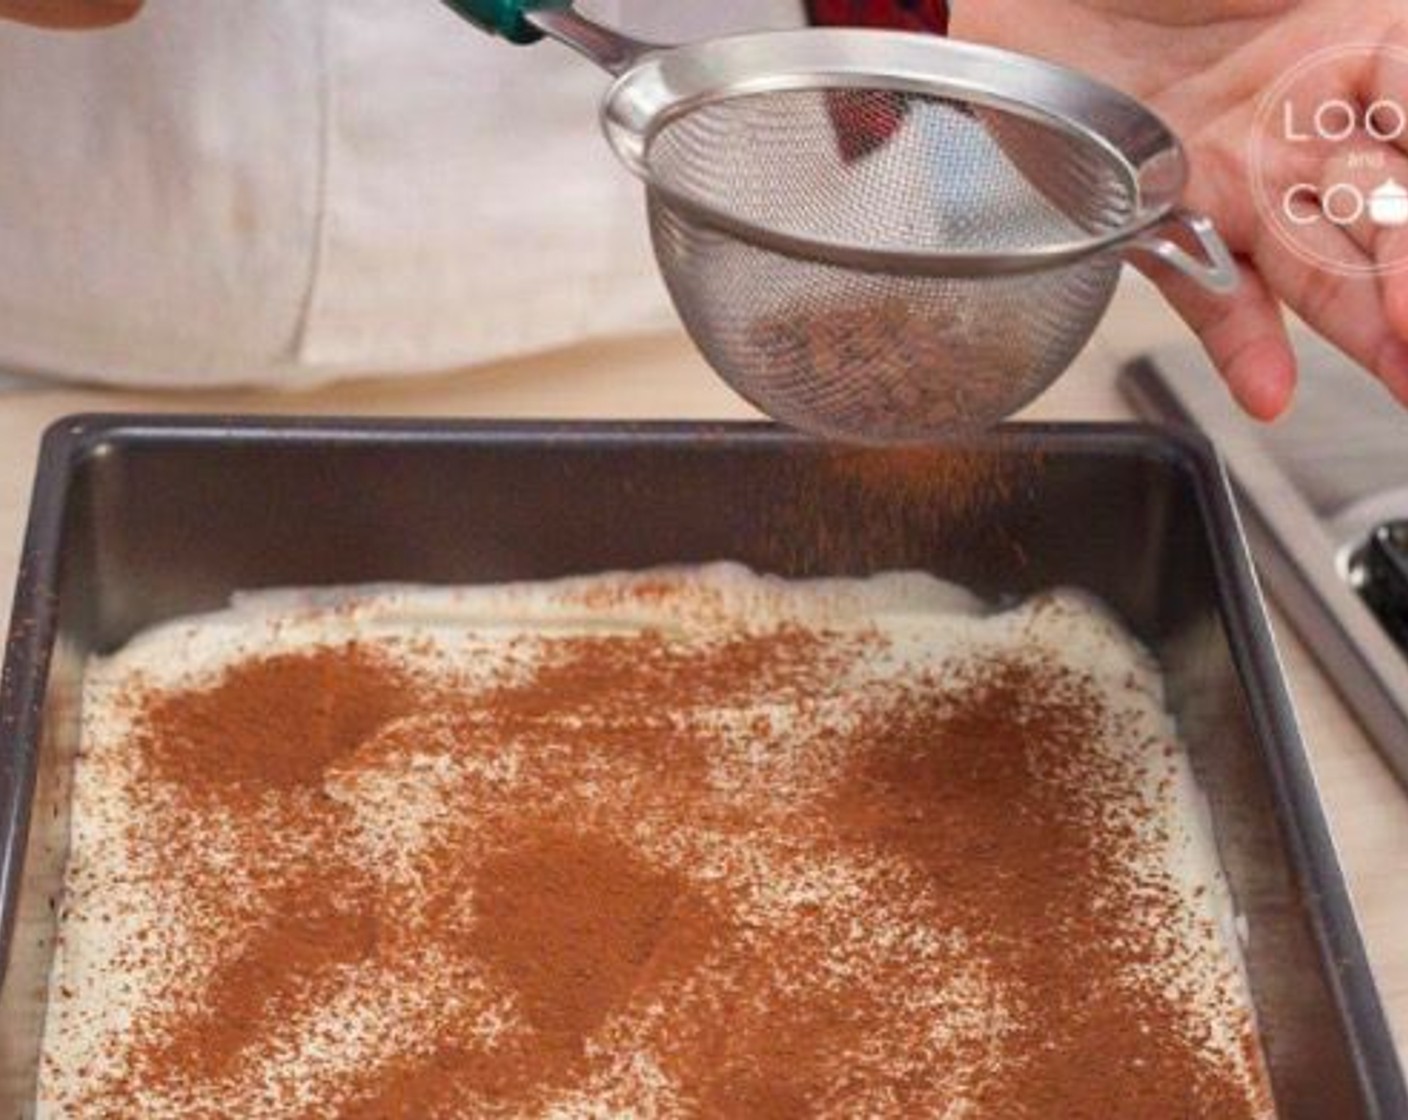 step 10 Pour half of the tiramisu mixture over it and spread evenly. Sprinkle Unsweetened Cocoa Powder (to taste) on top.